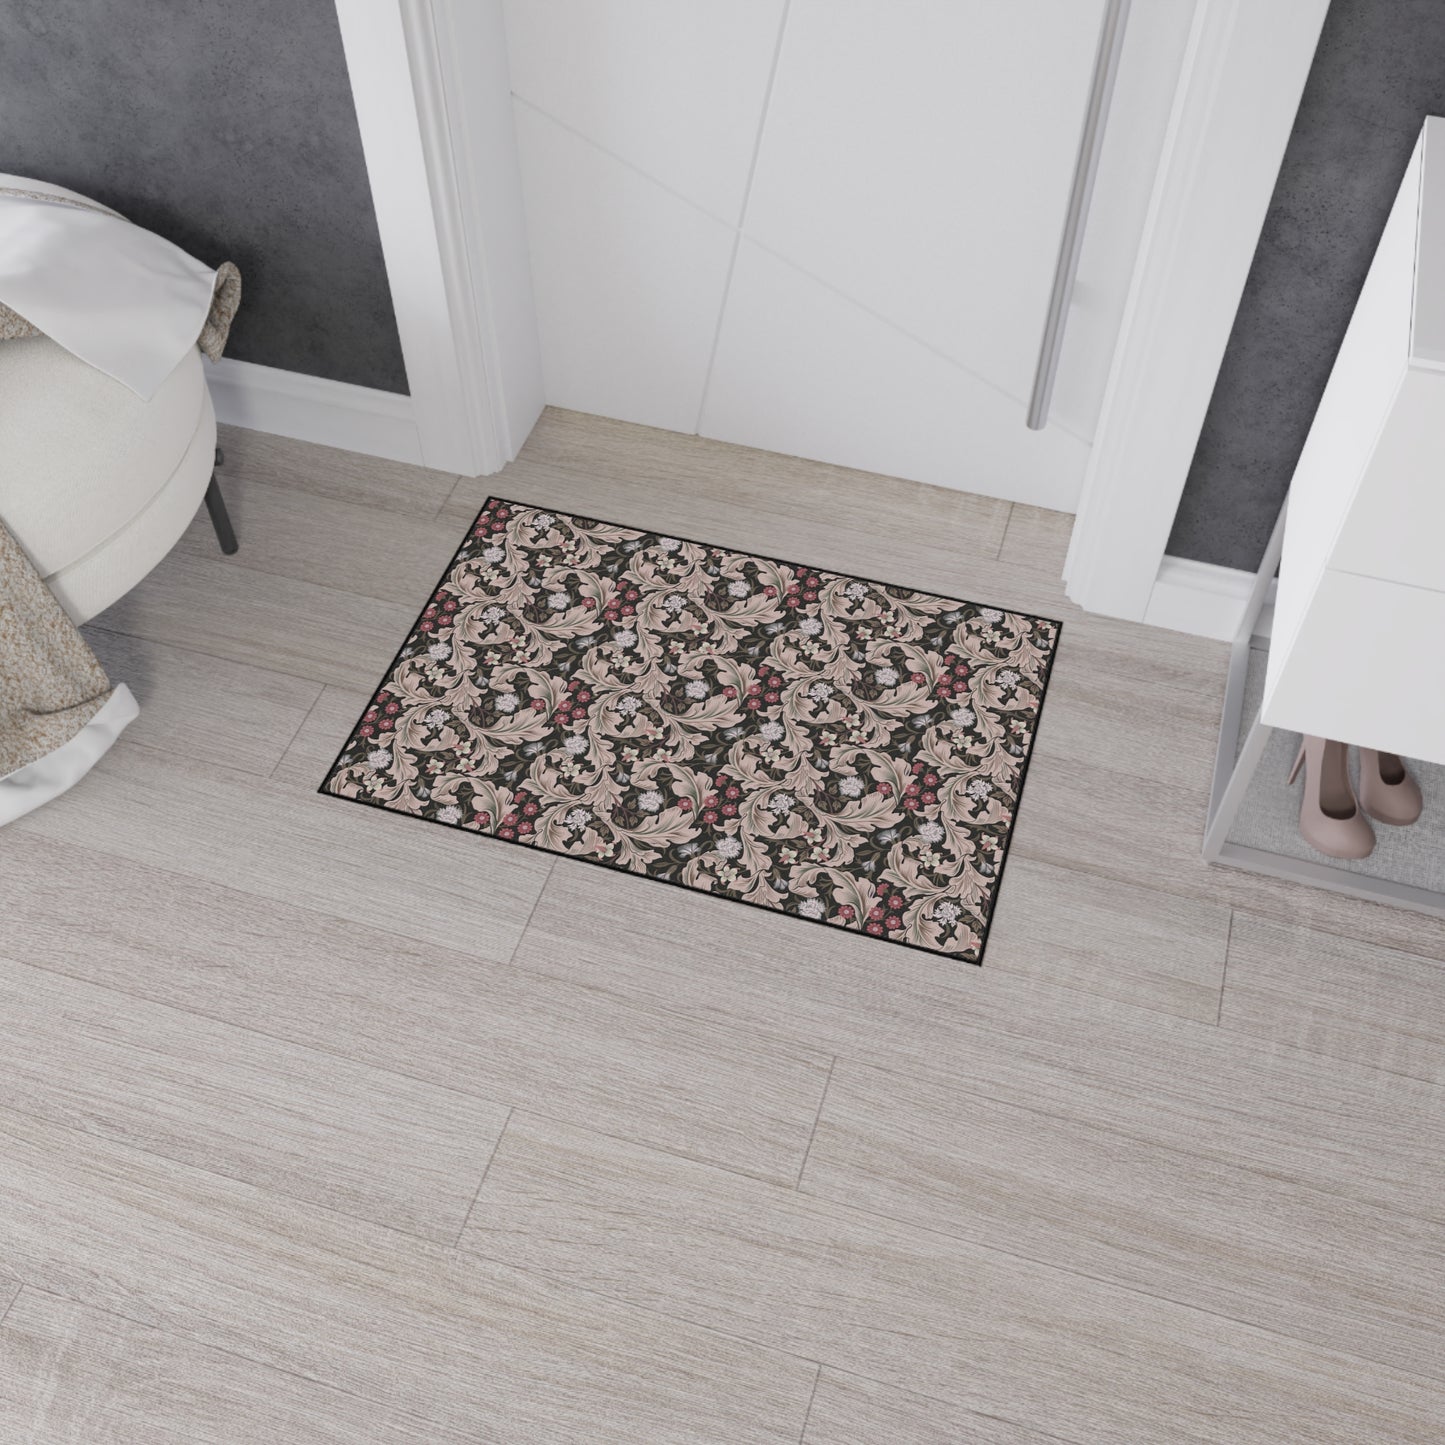 william-morris-co-heavy-duty-floor-mat-leicester-collection-mocha-13